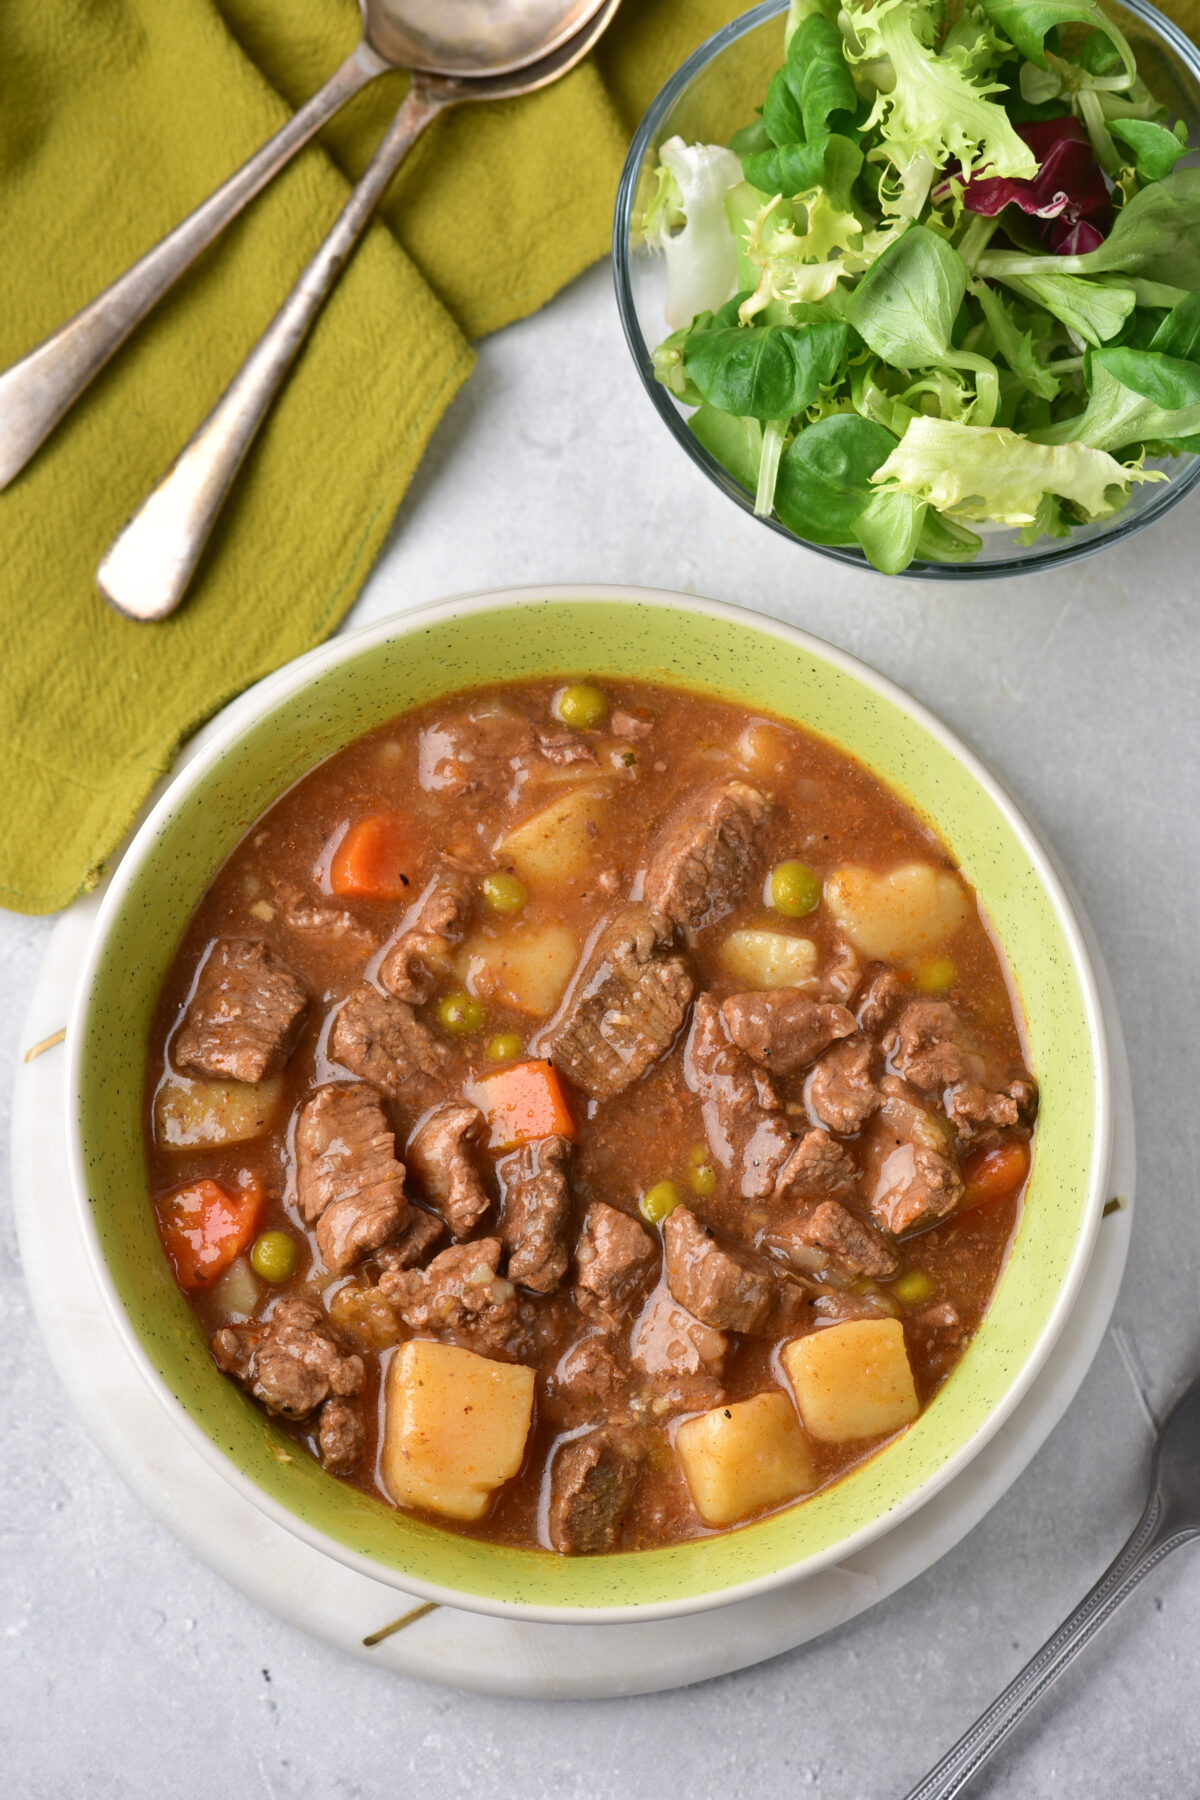 This is the best Instant Pot beef stew recipe that you'll ever make. It's quick and easy, and the end result is a hearty and delicious meal.